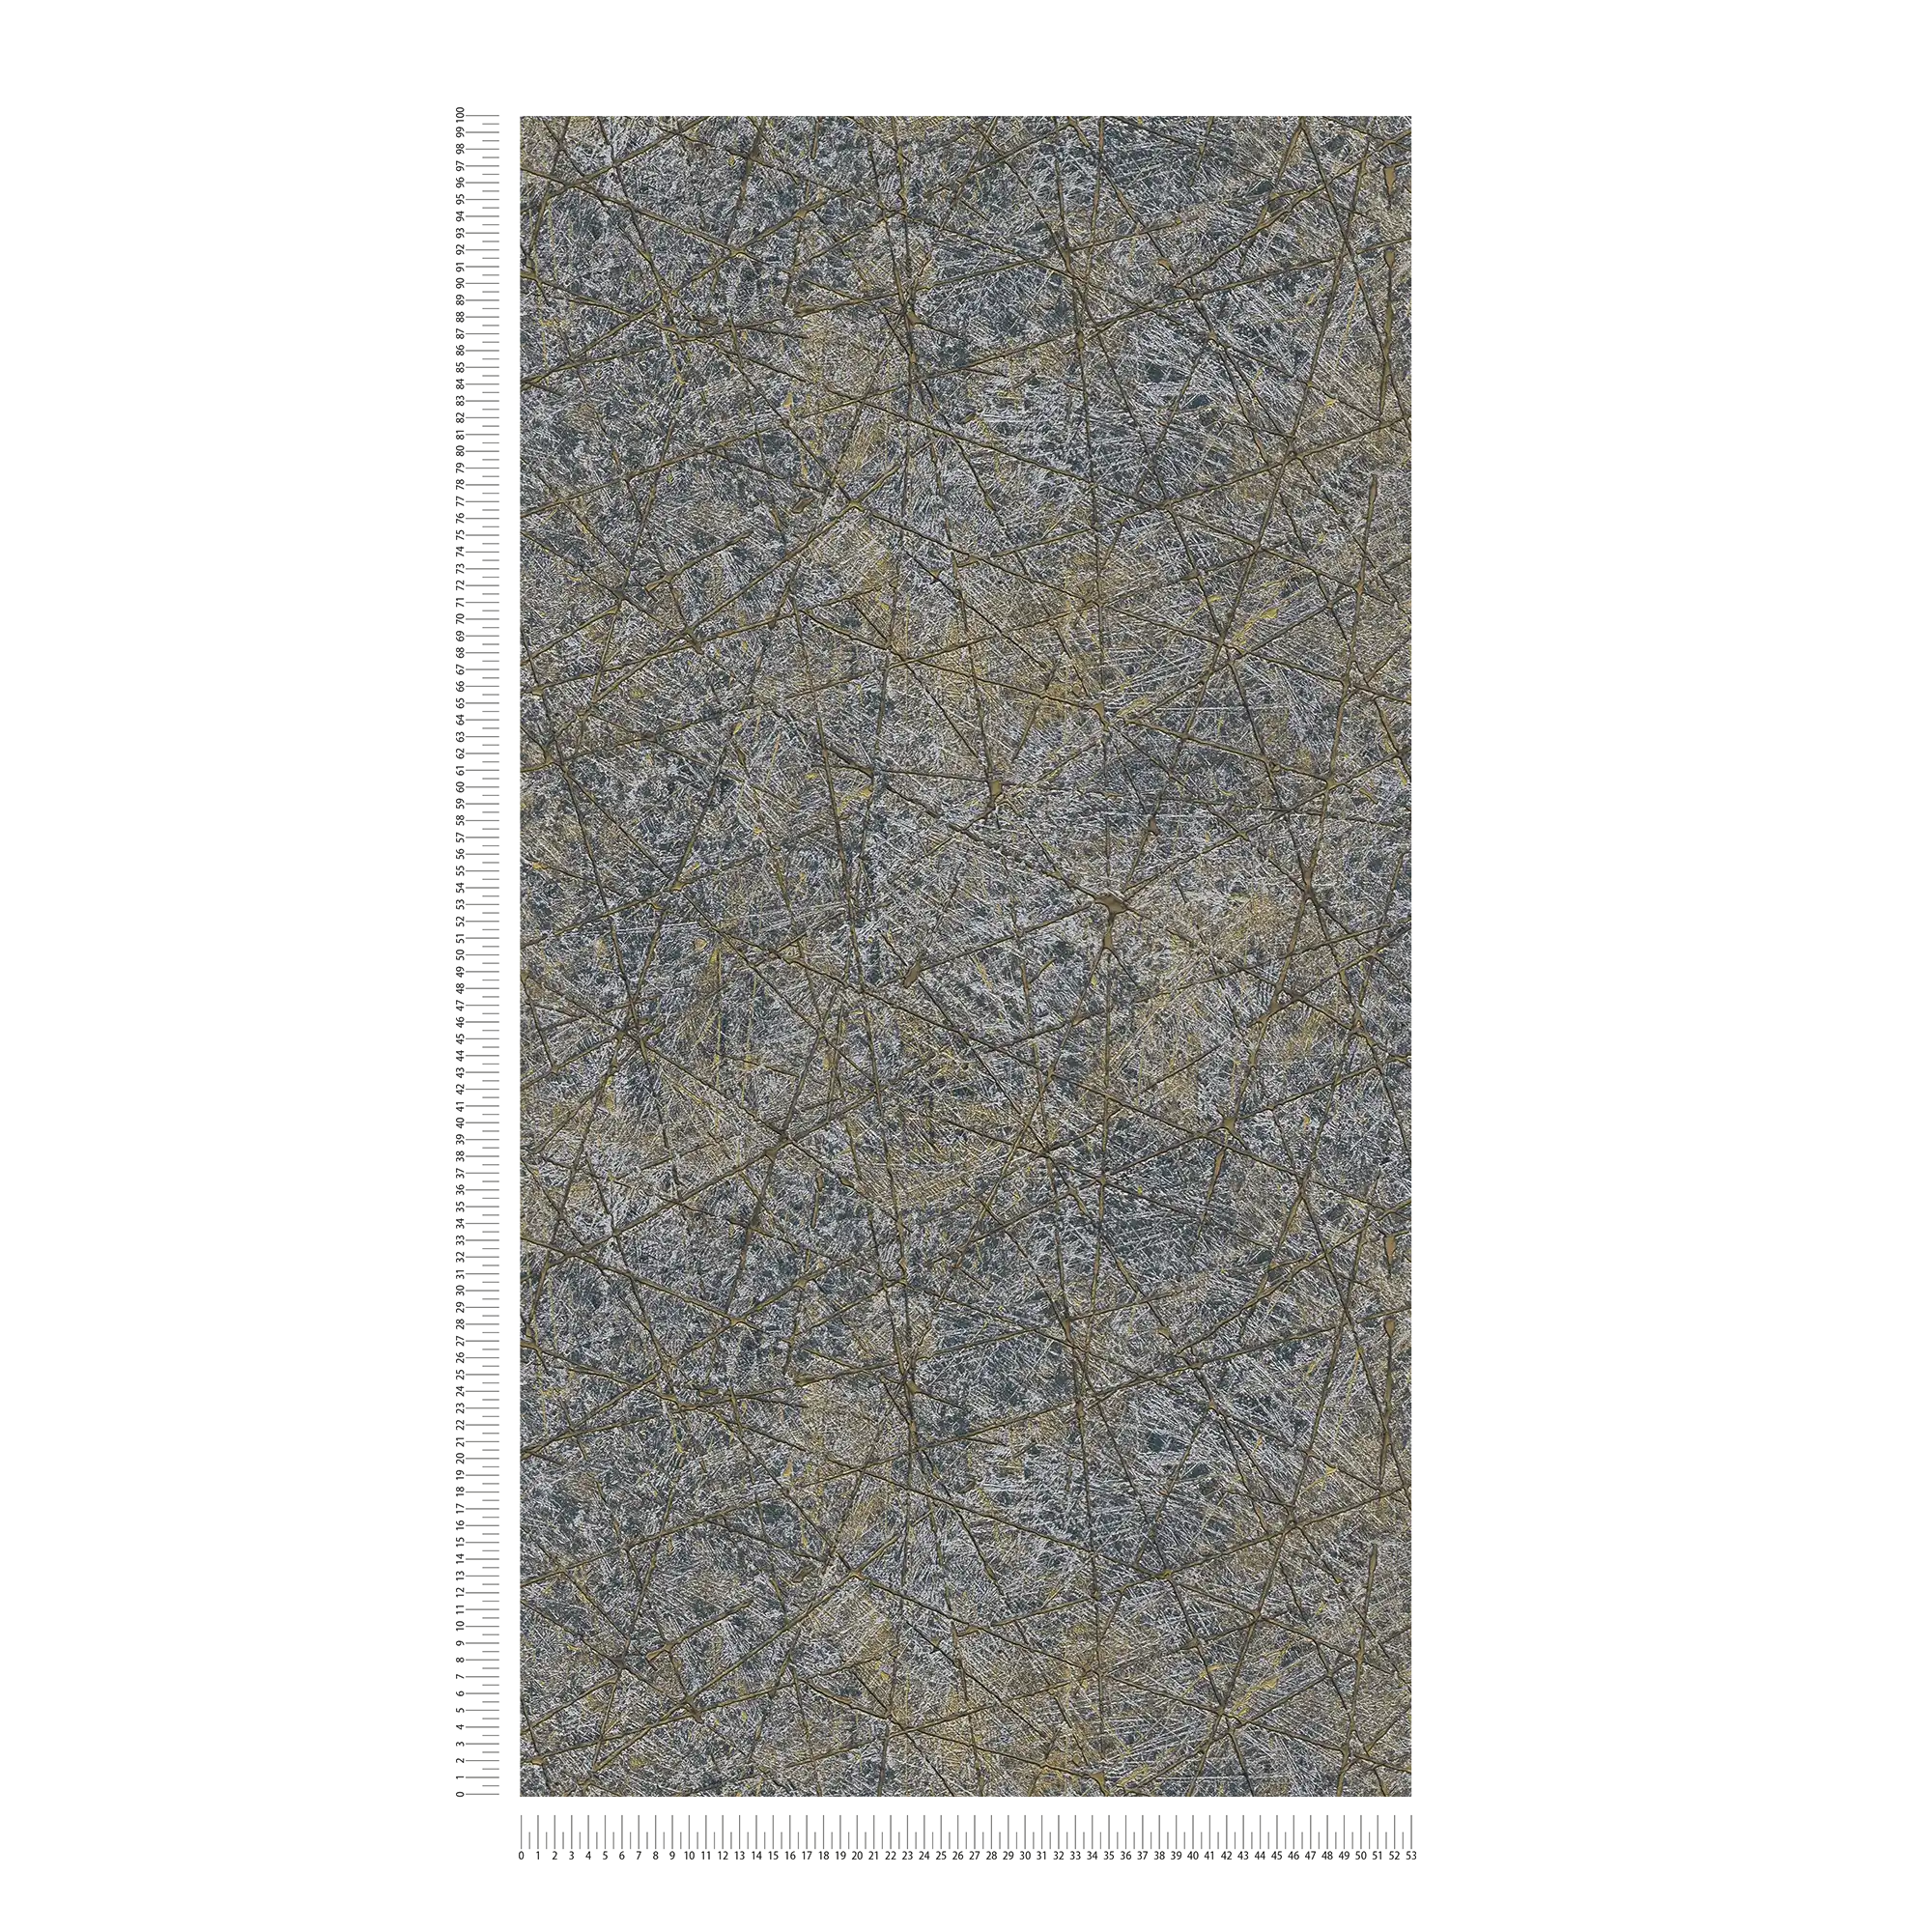             Non-woven wallpaper with abstract graphic pattern - black, gold, silver
        